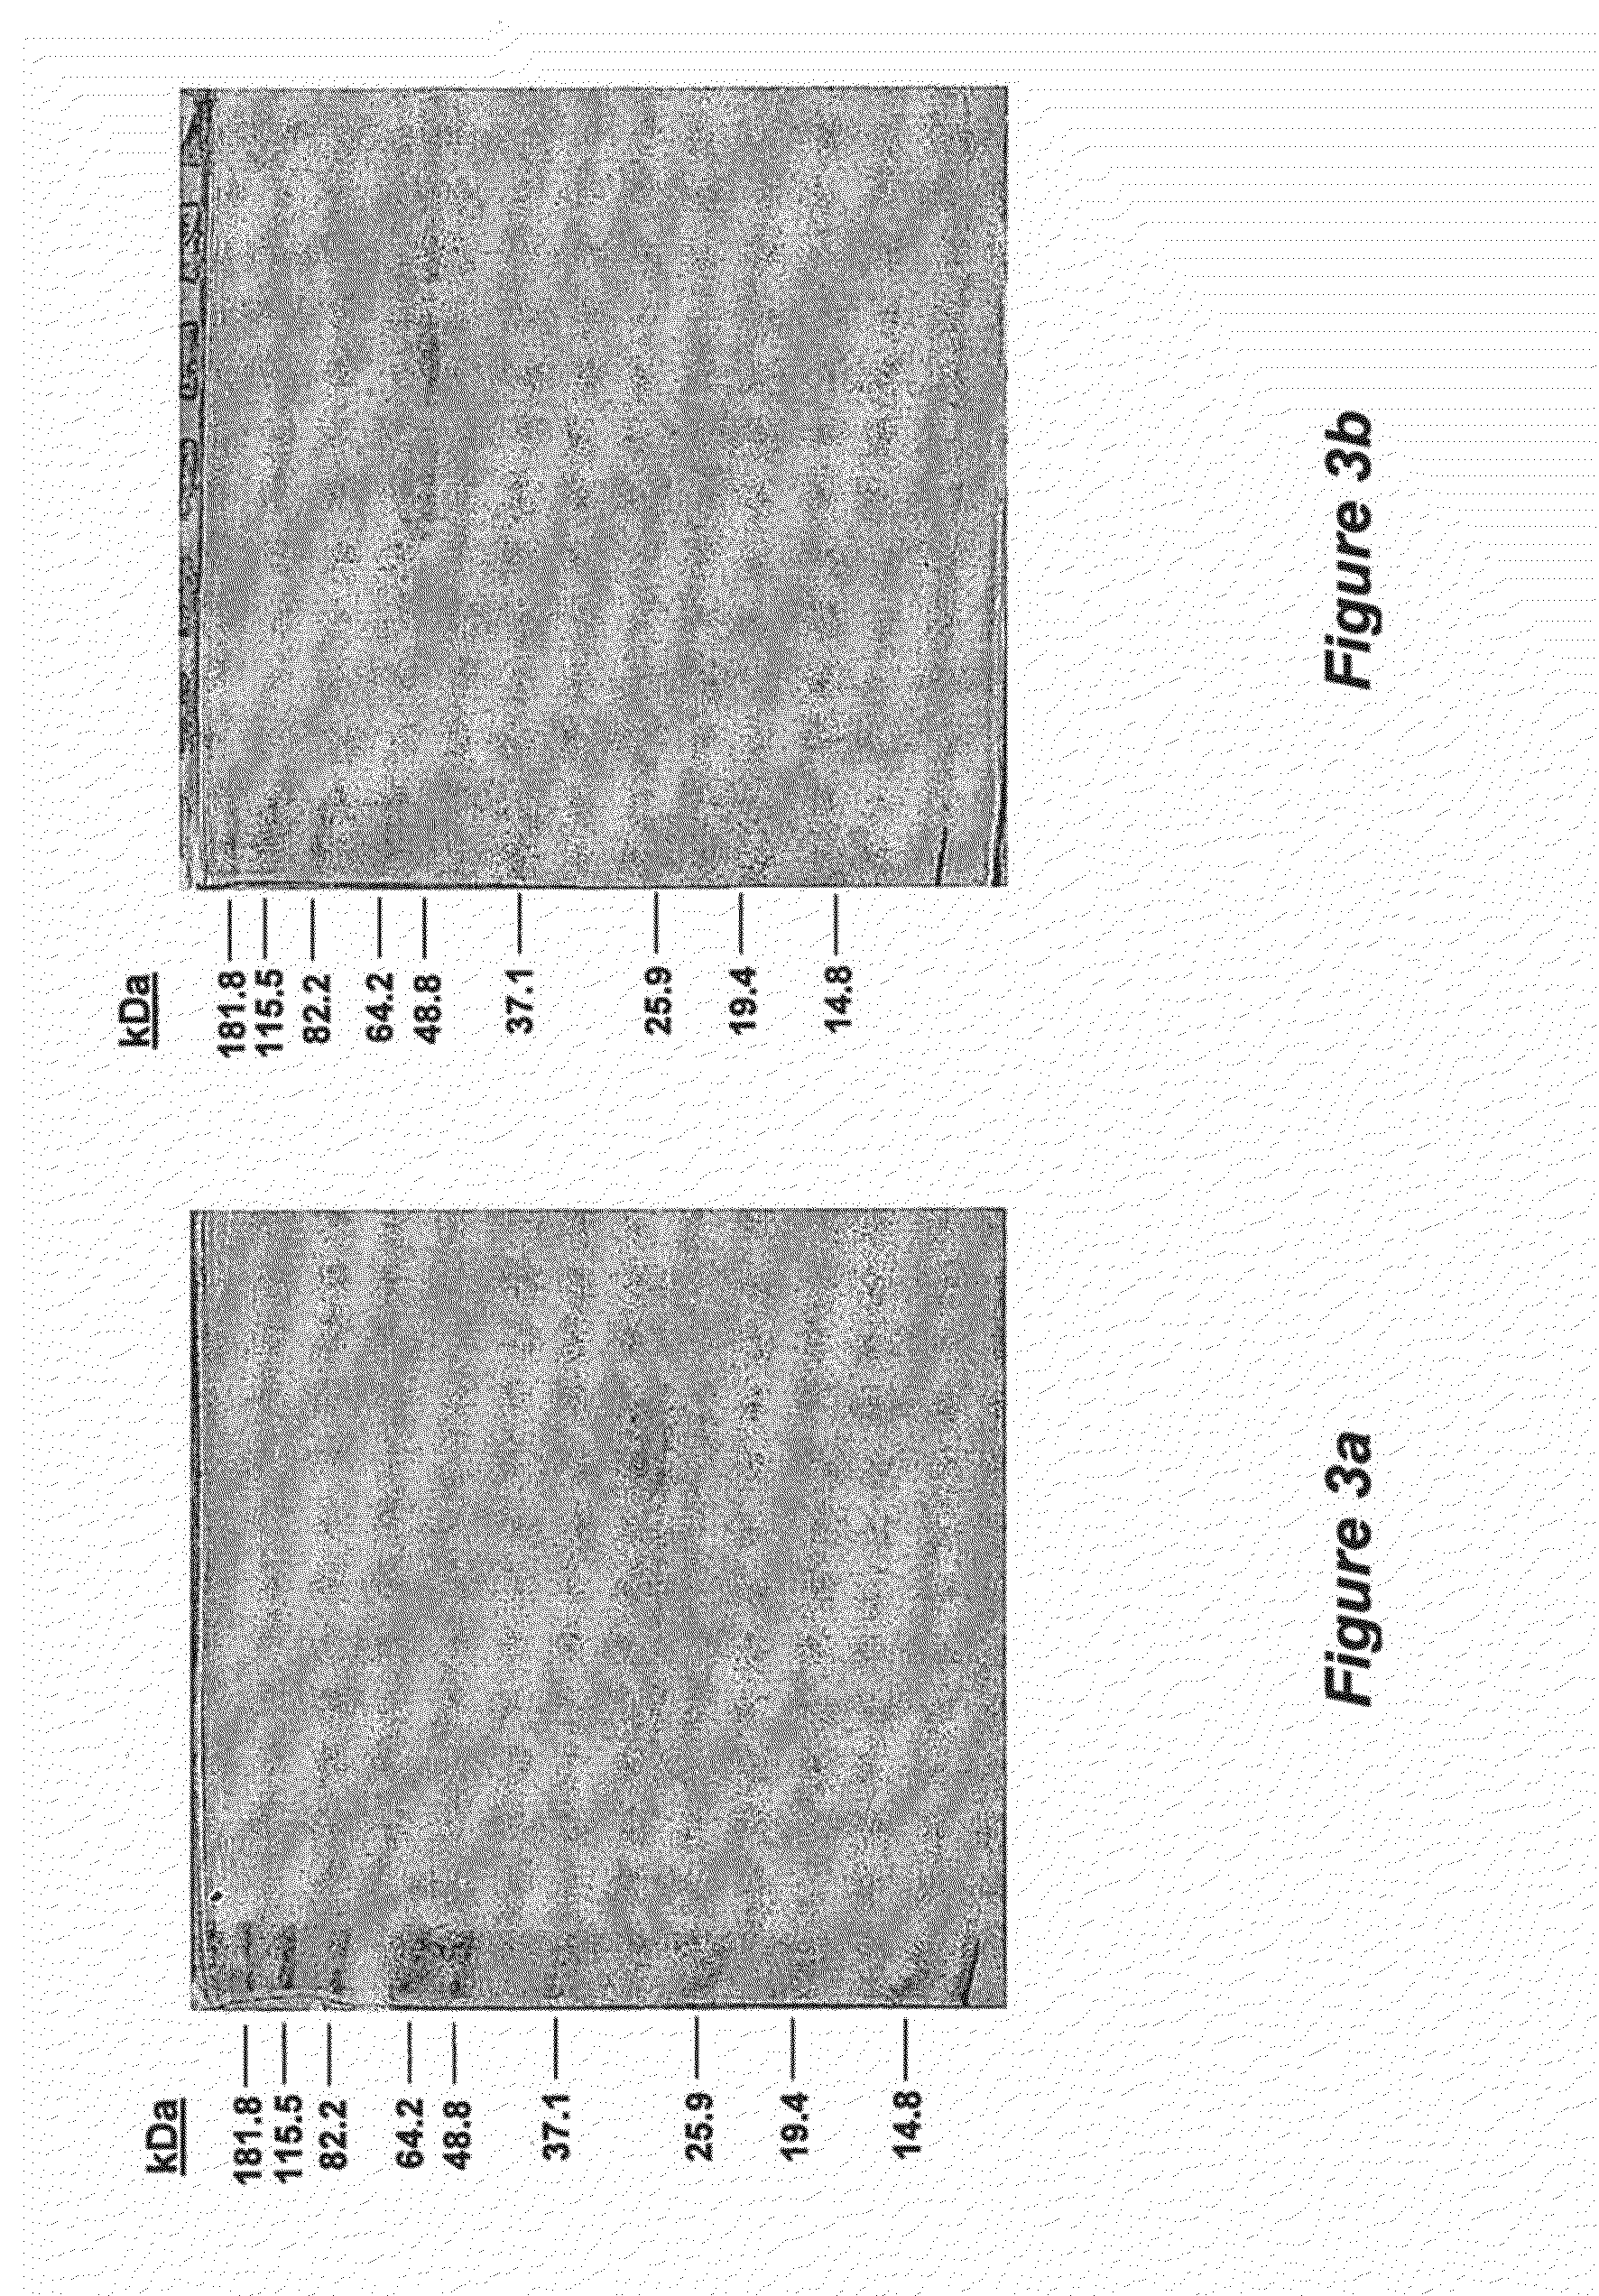 MULTIMERIC Fc RECEPTOR POLYPEPTIDES INCLUDING A MODIFIED Fc DOMAIN